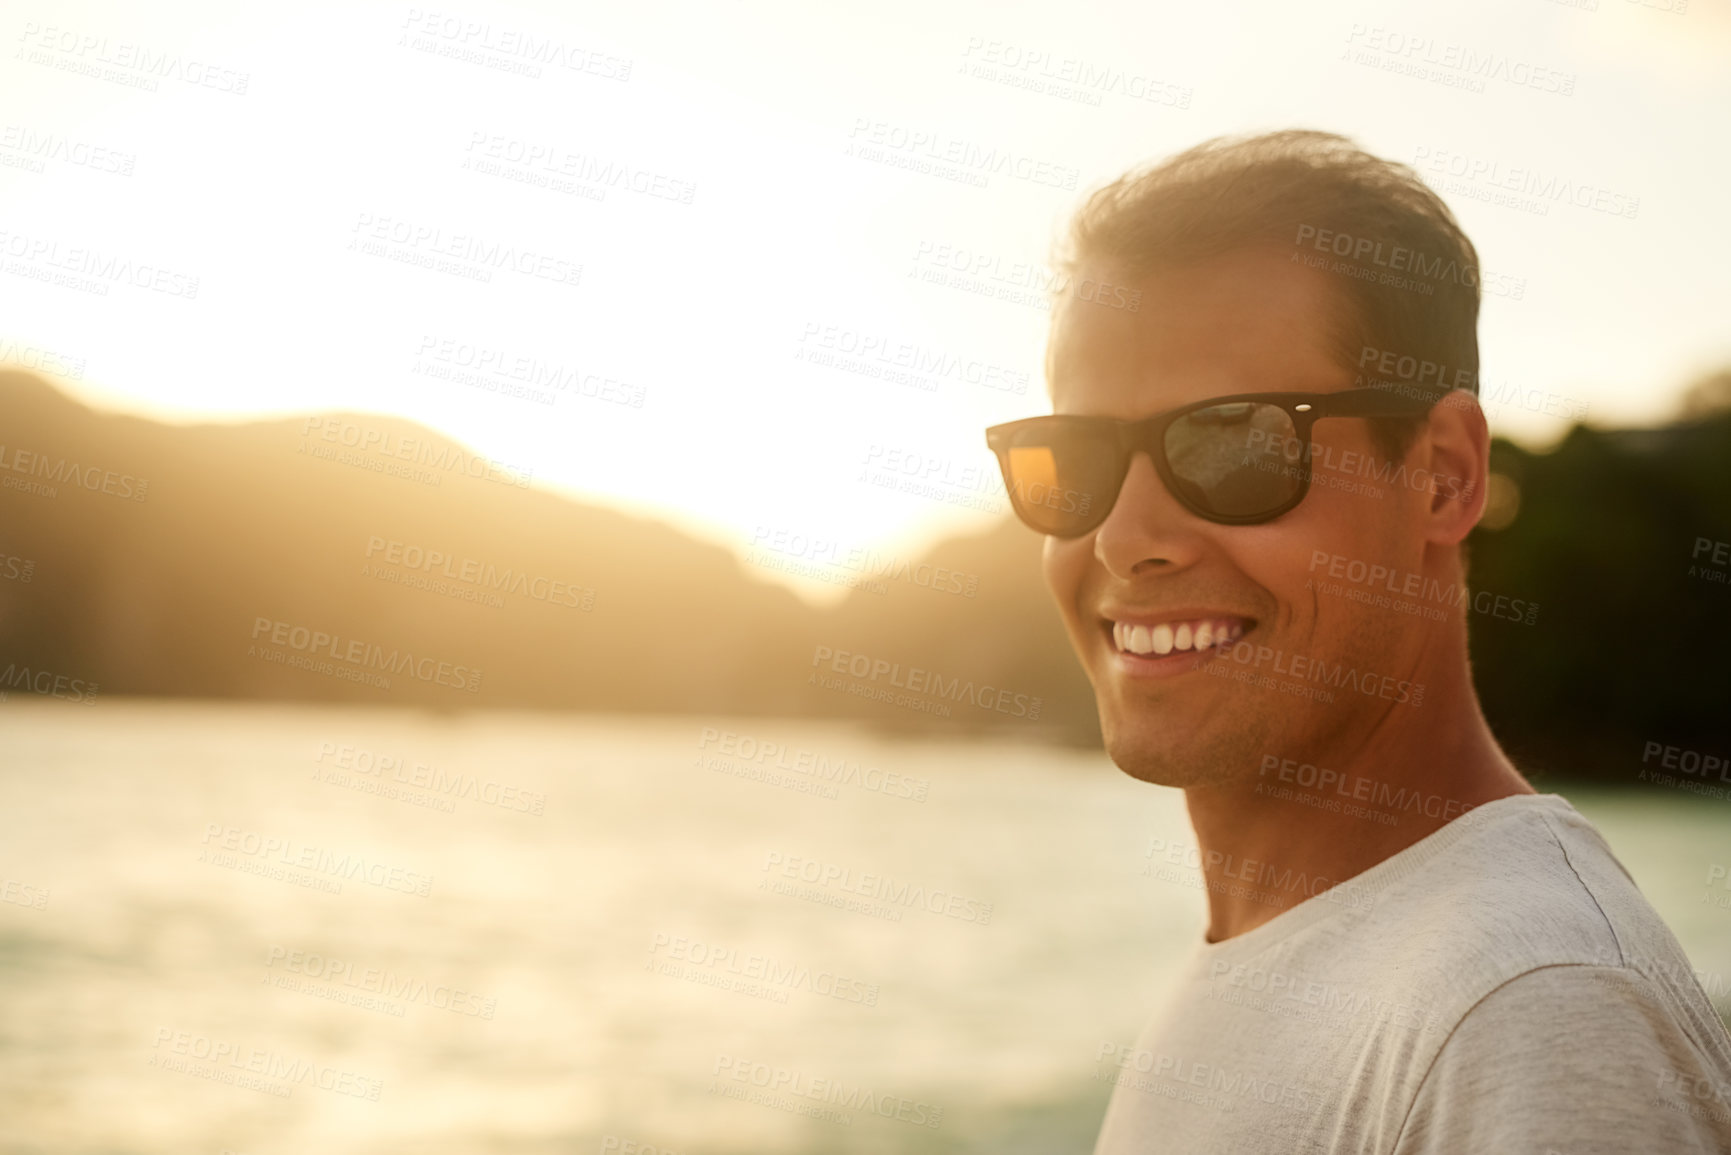 Buy stock photo Portrait of a handsome young man standing on the beach at sunset